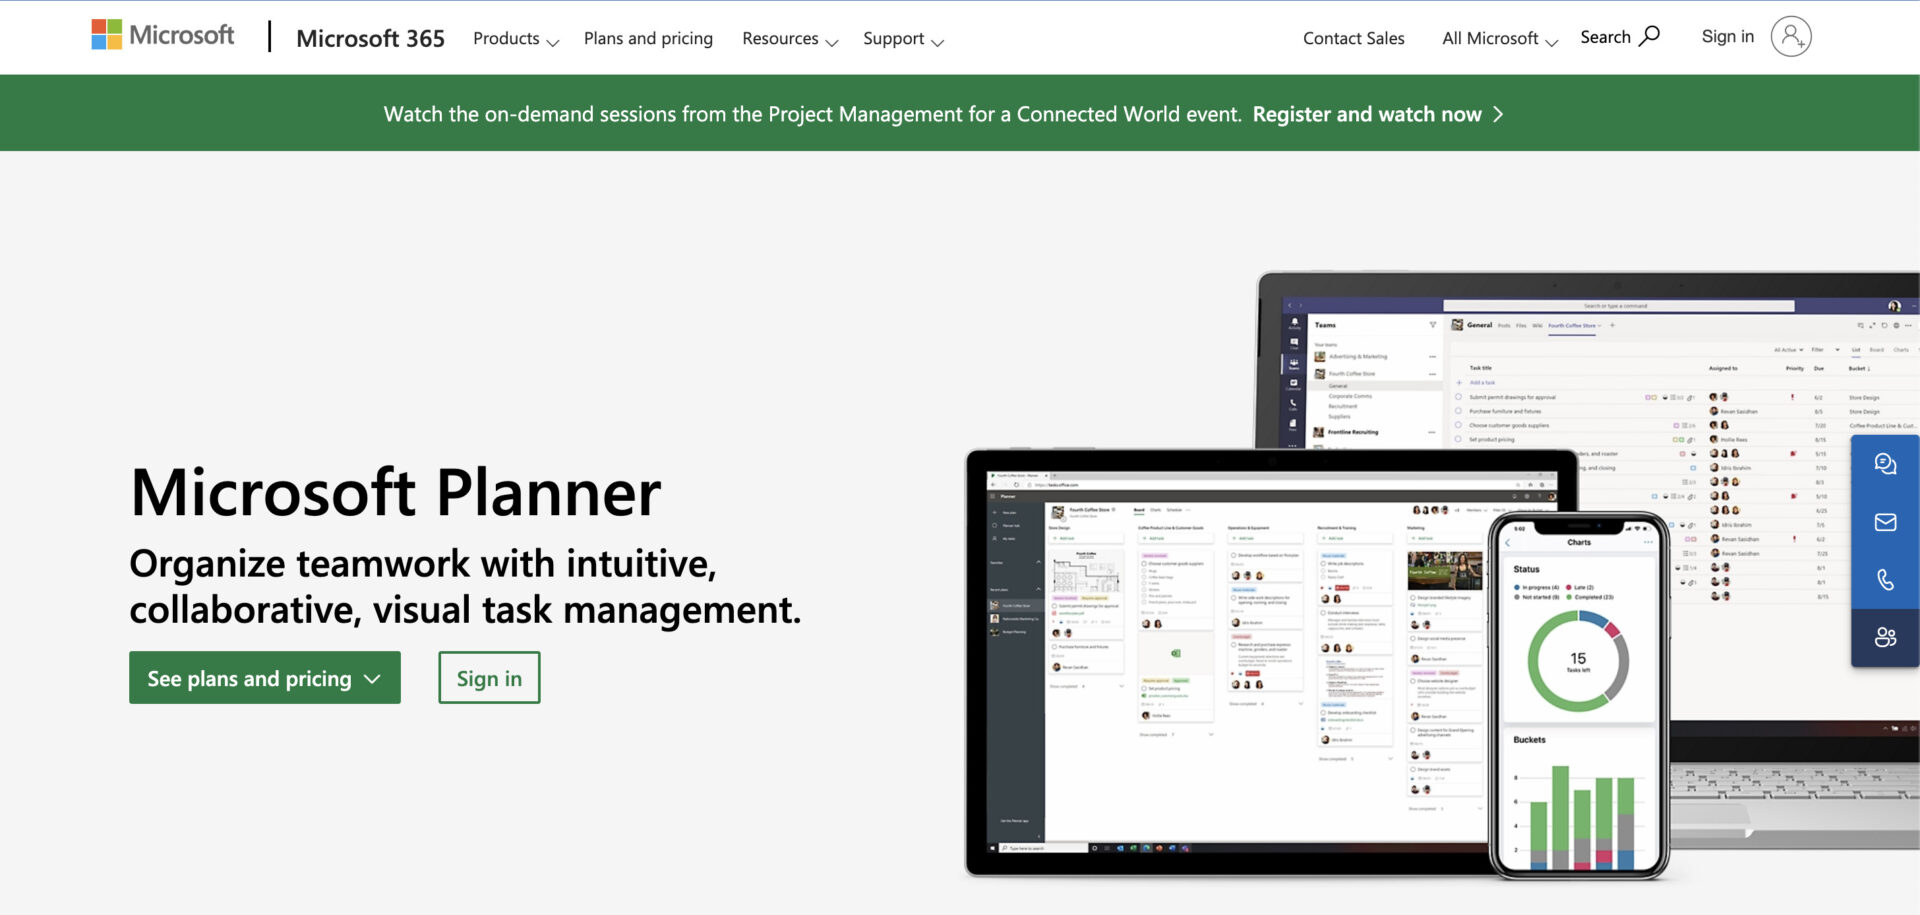 Top page of Microsoft Planner